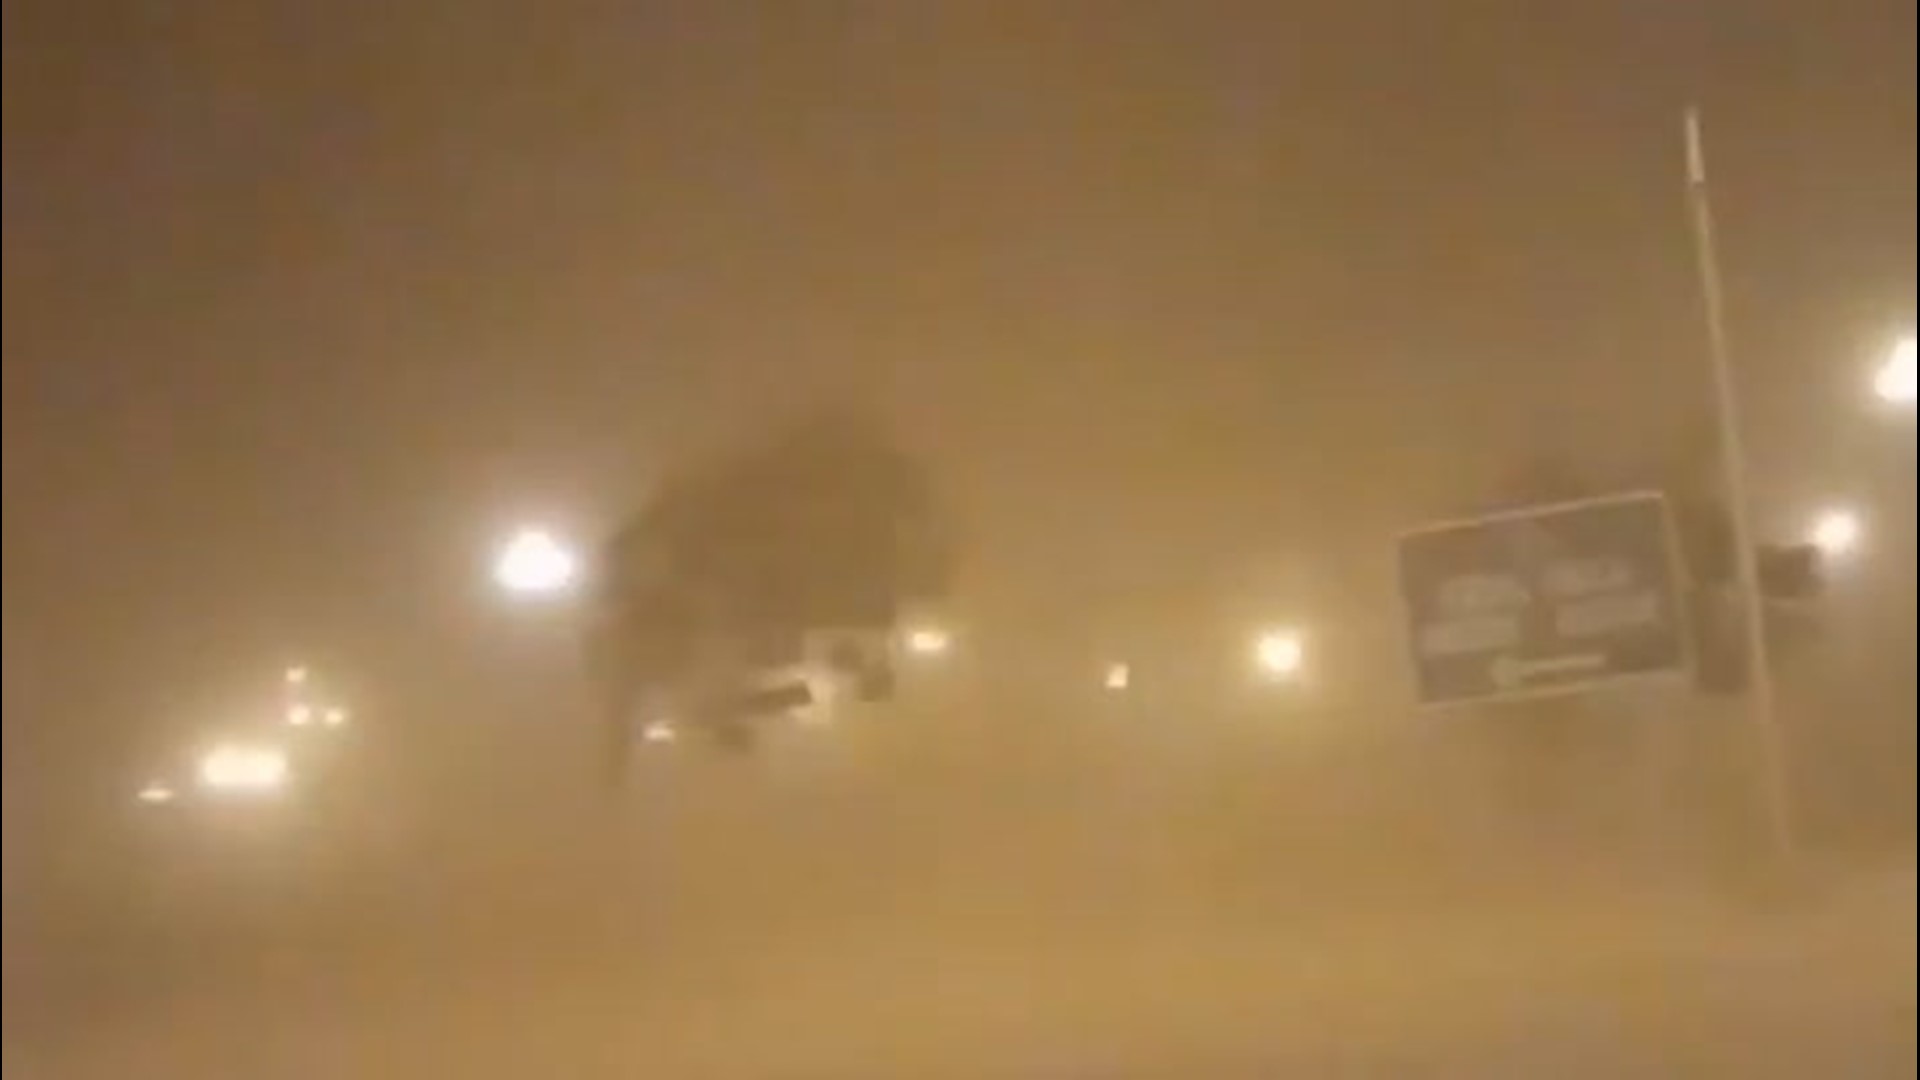 A dust storm caused near-zero visibility in Karachi, Pakistan, on June 3.